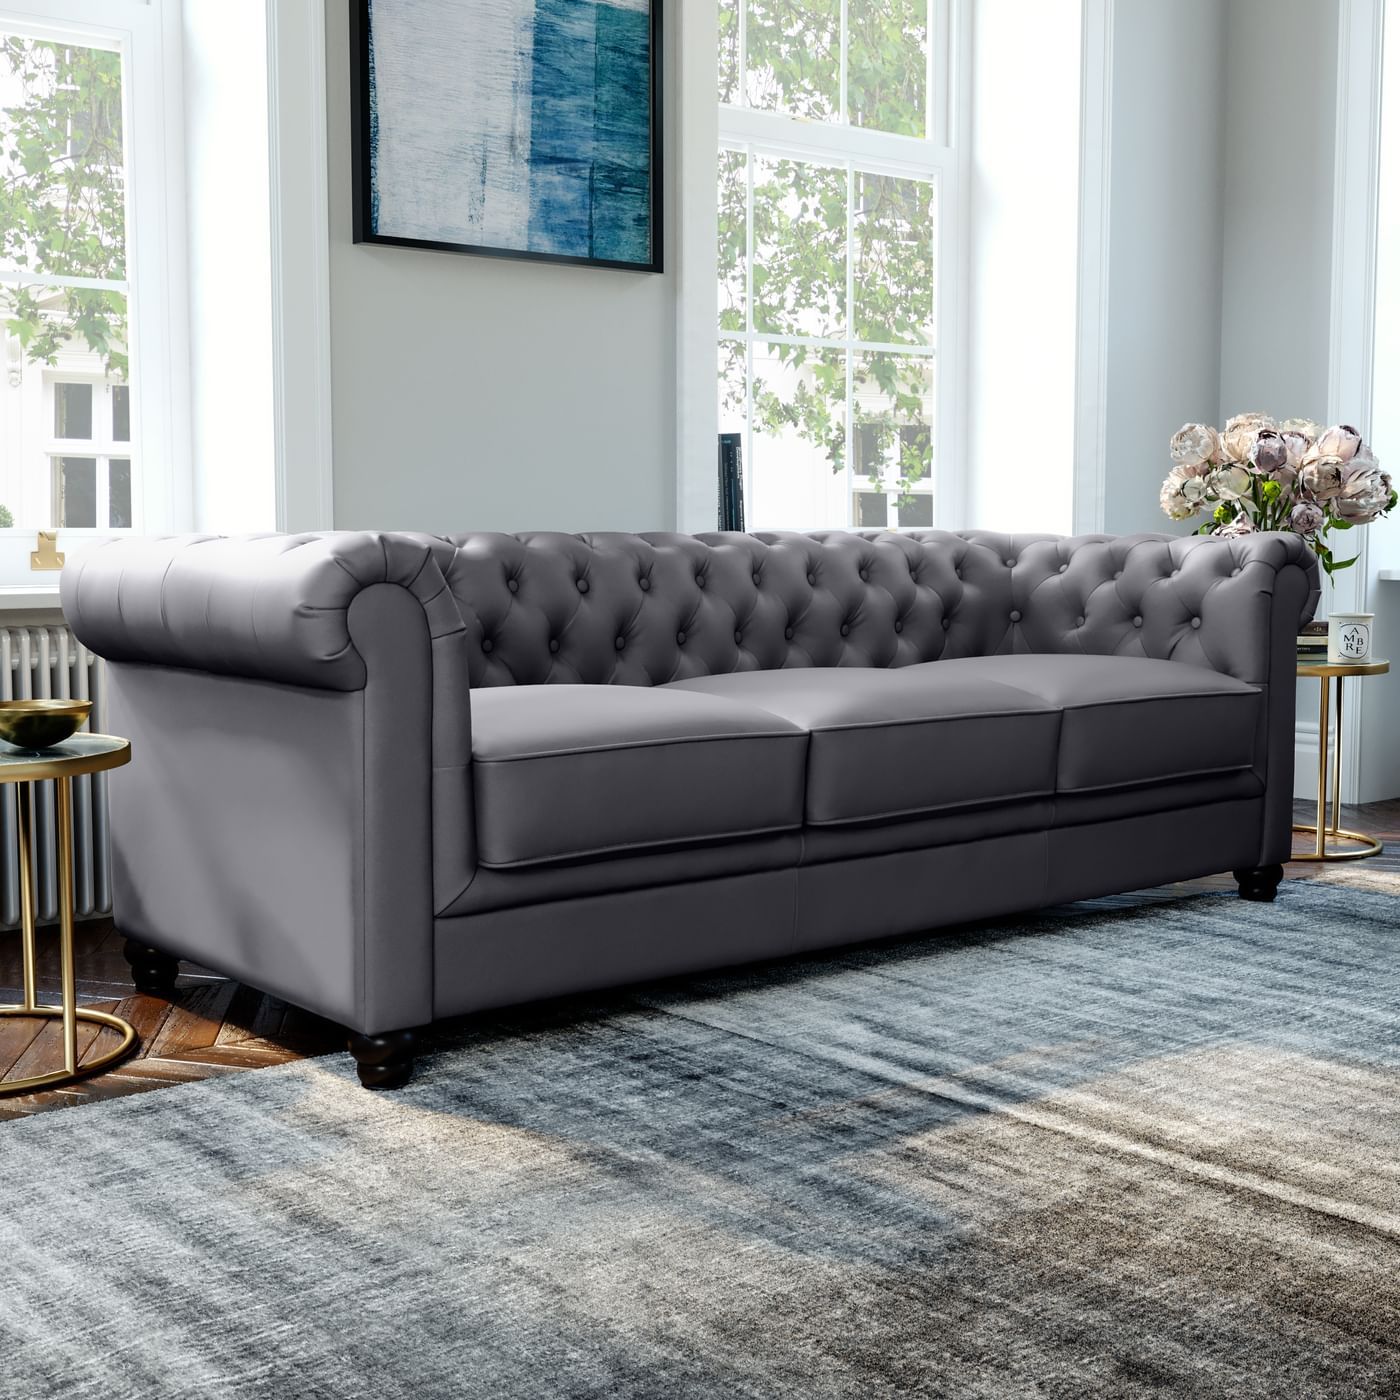 Hampton Grey Leather 3 Seater Chesterfield Sofa | Furniture Choice With Regard To Sofas In Dark Grey (View 11 of 20)